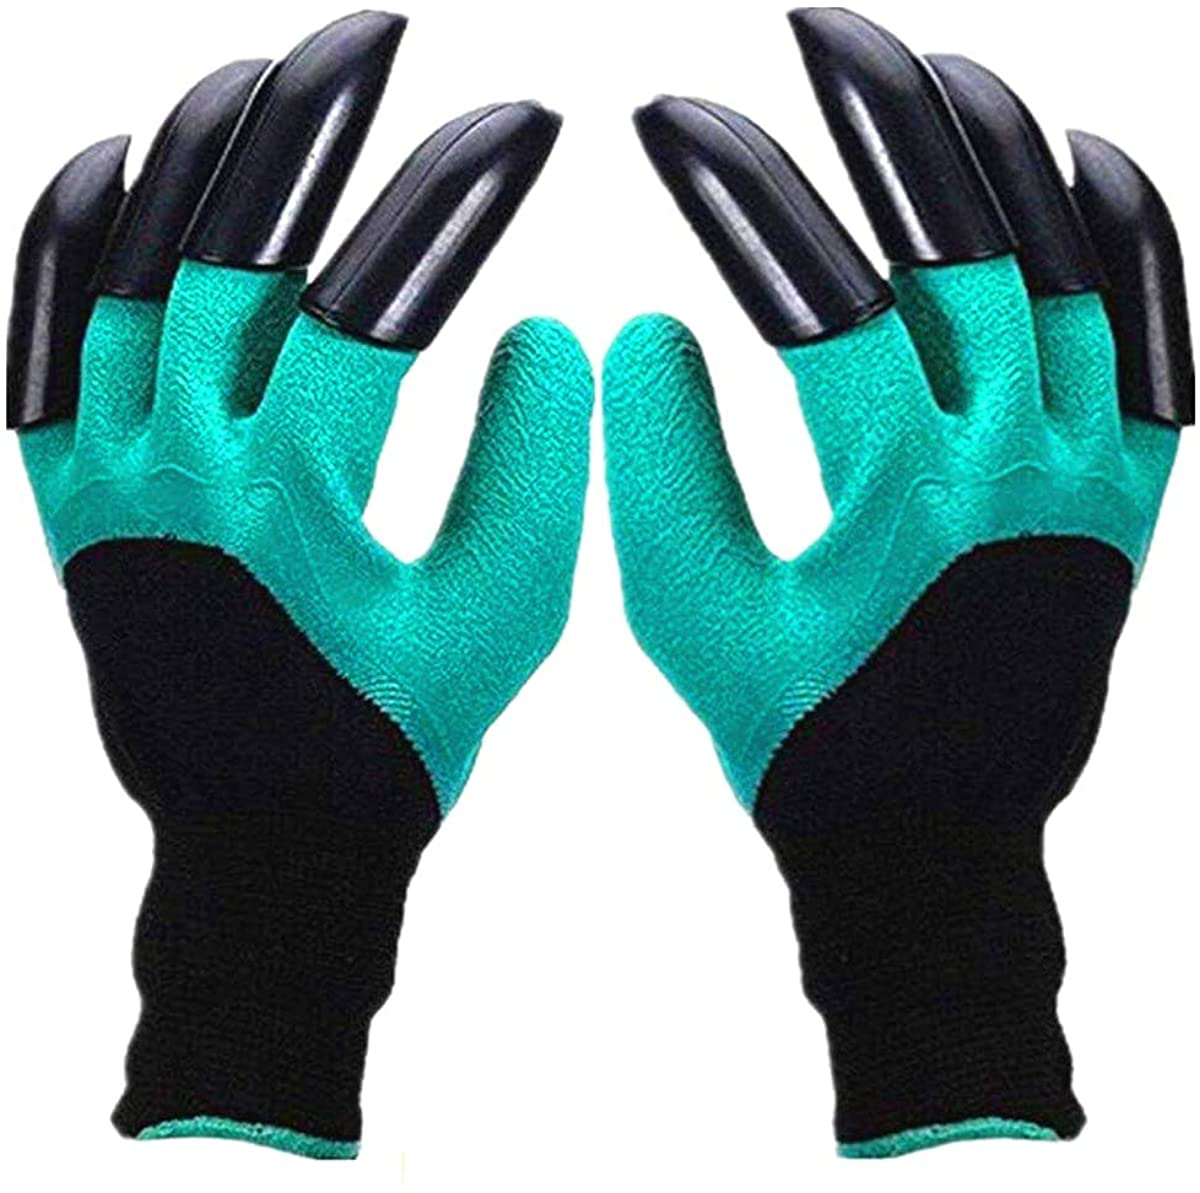 Claw Gardening Gloves for Digging and Planting, Garden Glove Claws Best Gift for Gardener and Women